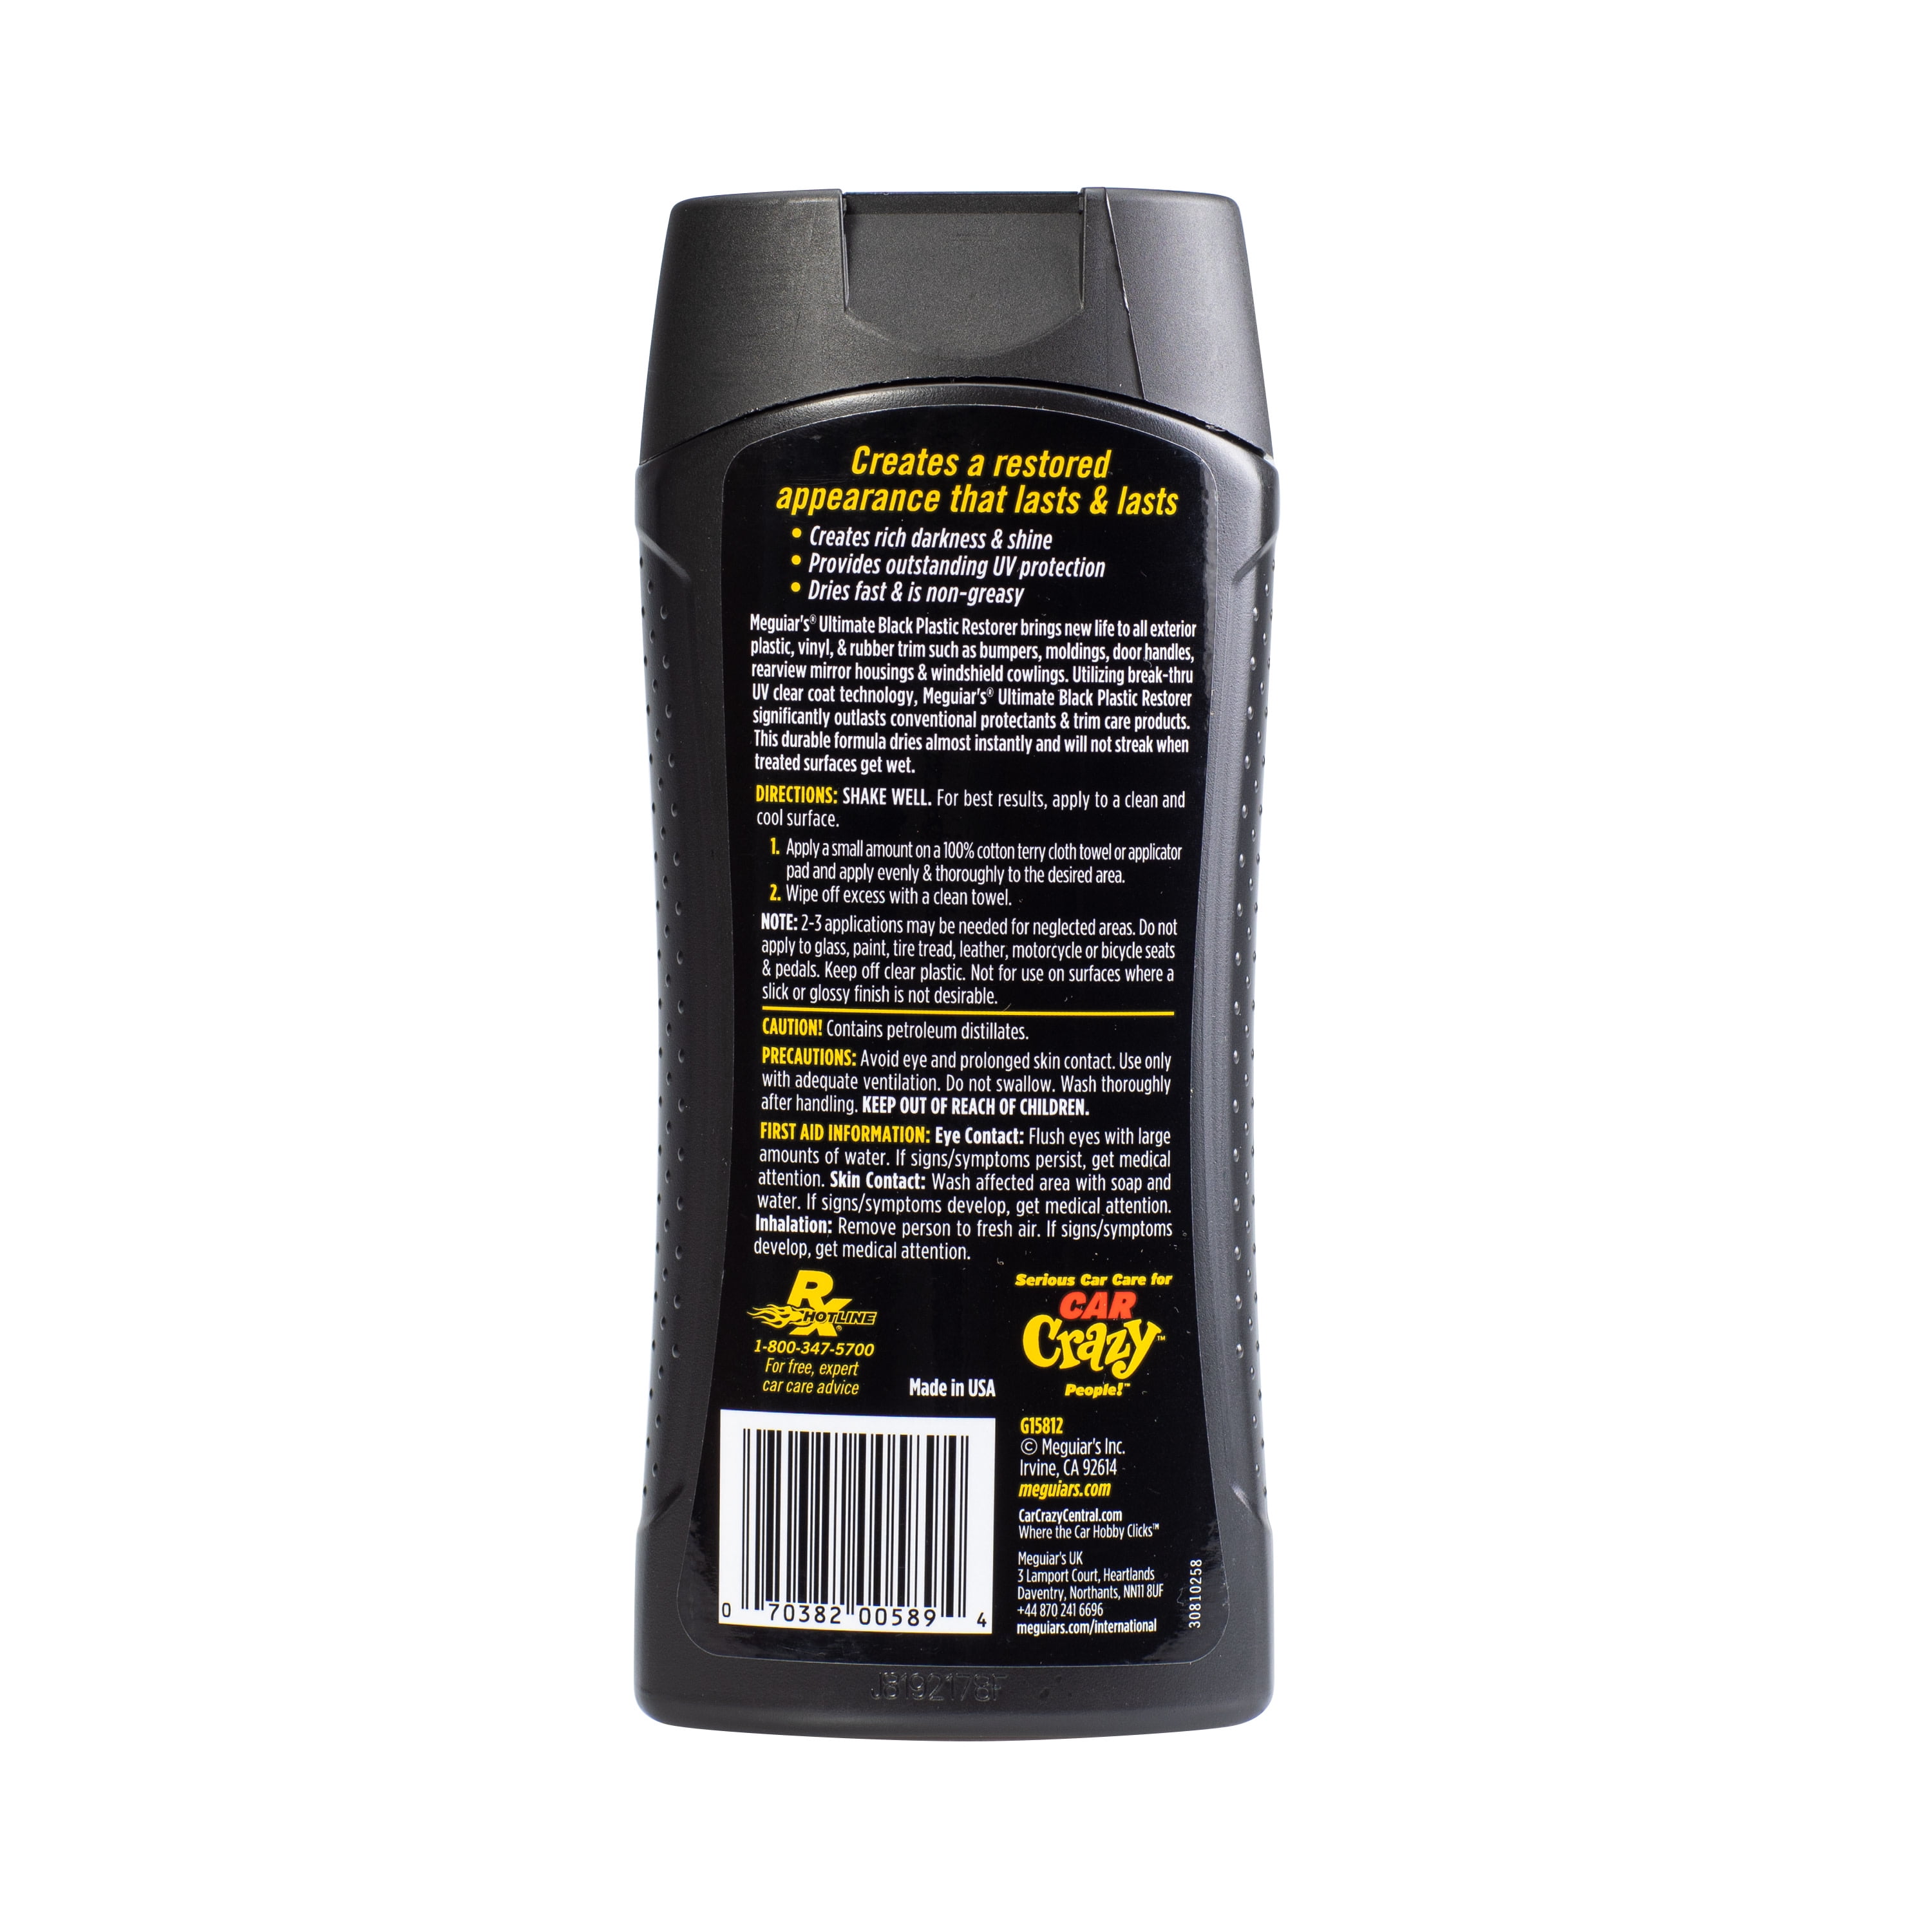 Meguiar's Ultimate Protectant Dash & Trim Restorer 35 - G14512, Meguiars, Shop our Full Range by Brand at Autobarn, Autobarn Category